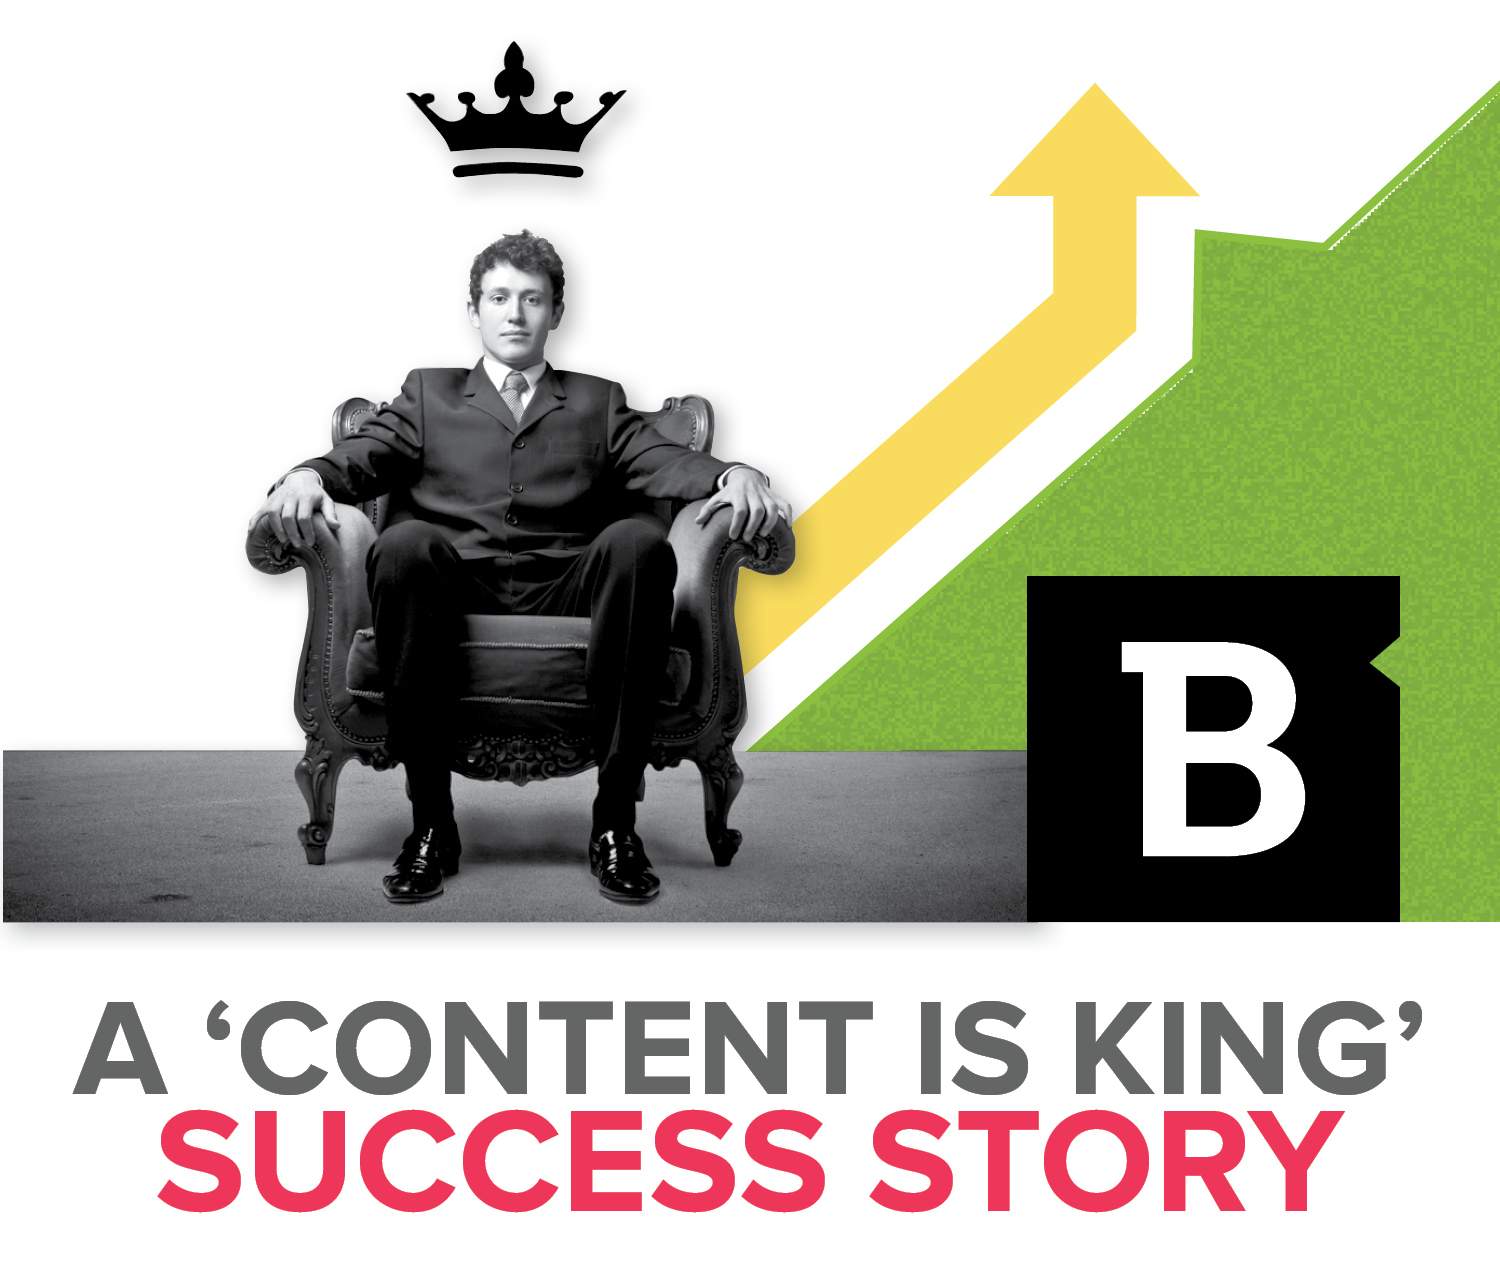 Marketers say content is king because it provides value through conversions.